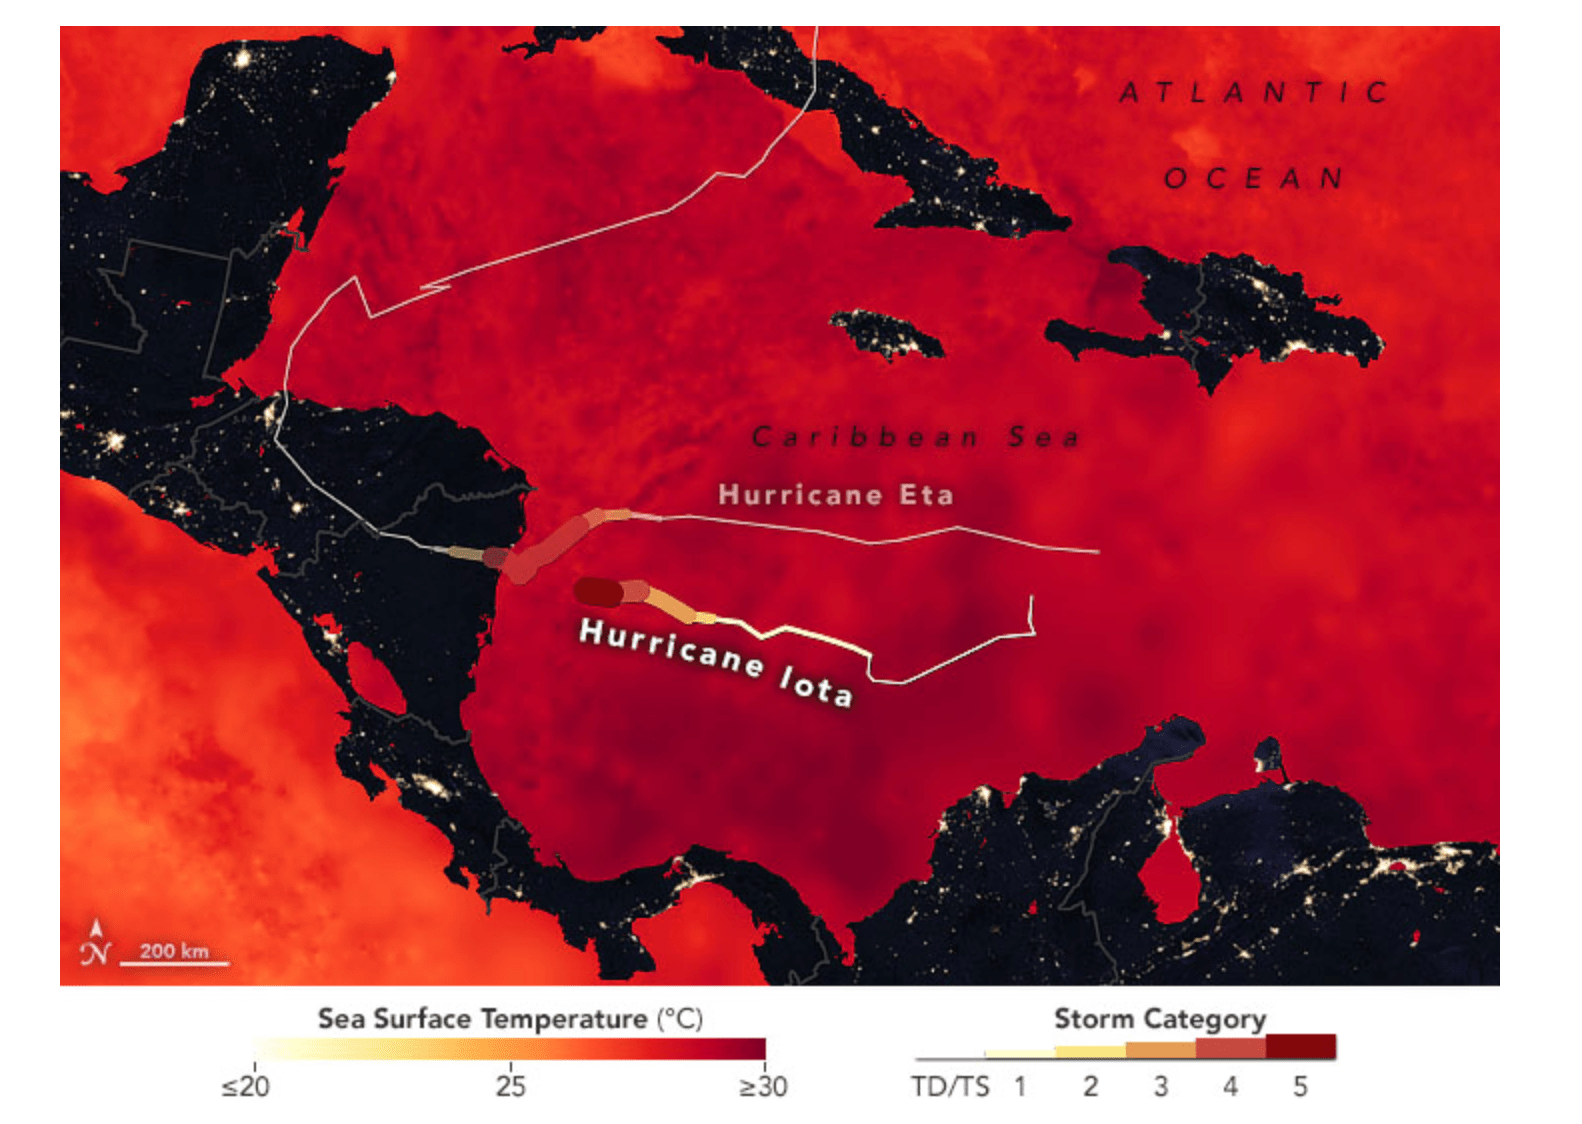 A map showing the tracks of Hurricanes Eta and Iota, both passing through the Caribbean Sea toward Central America. Sea surface temperature is mapped in oranges and reds, but the entire region is dark red, indicating high temperatures.